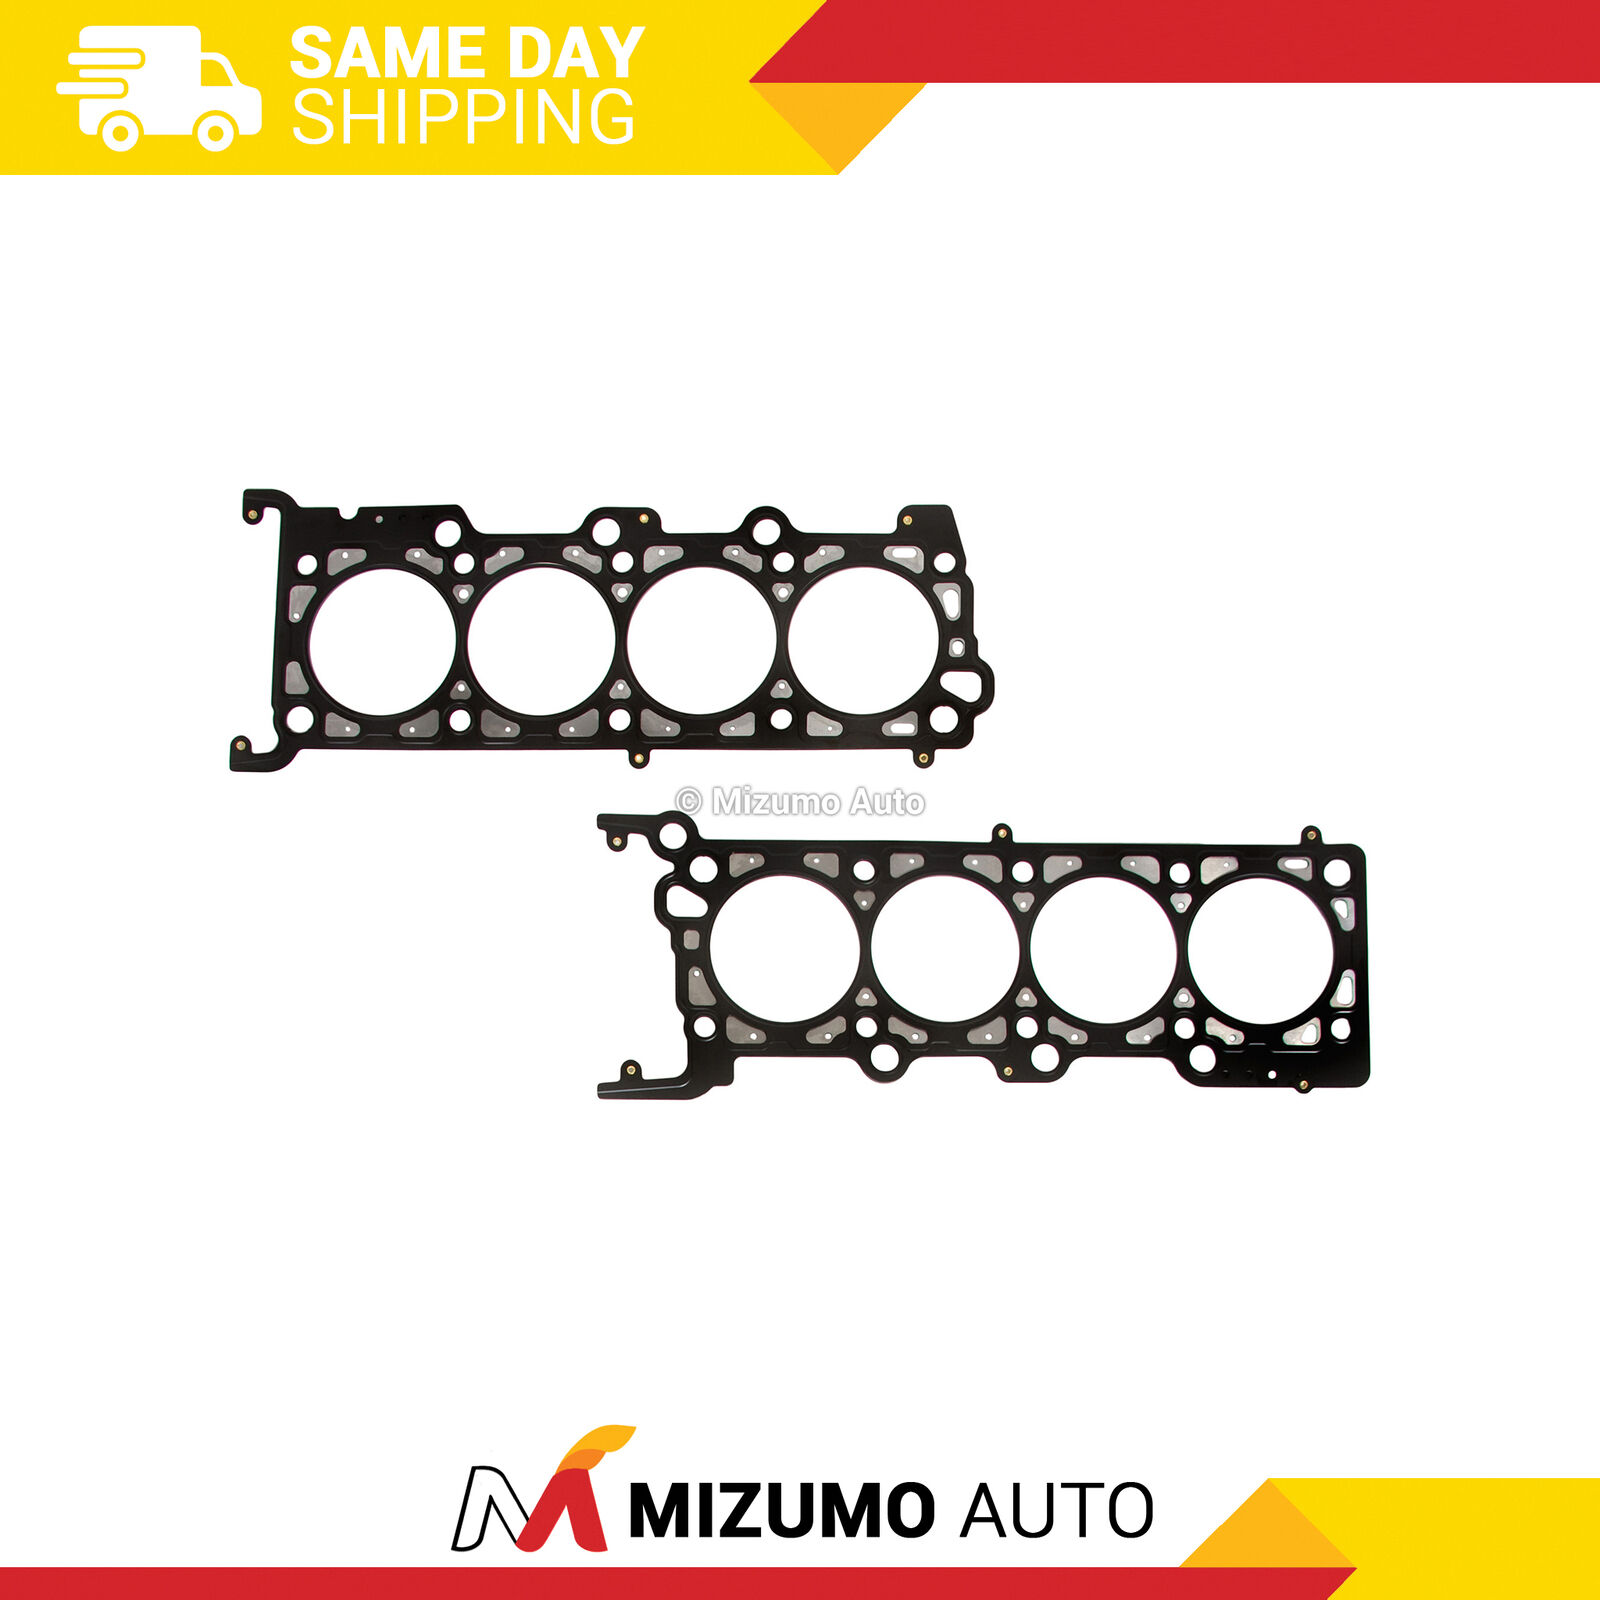 MLS Head Gasket Fit E-Series Ford F-Series Expedition Explorer 4.6L 16V